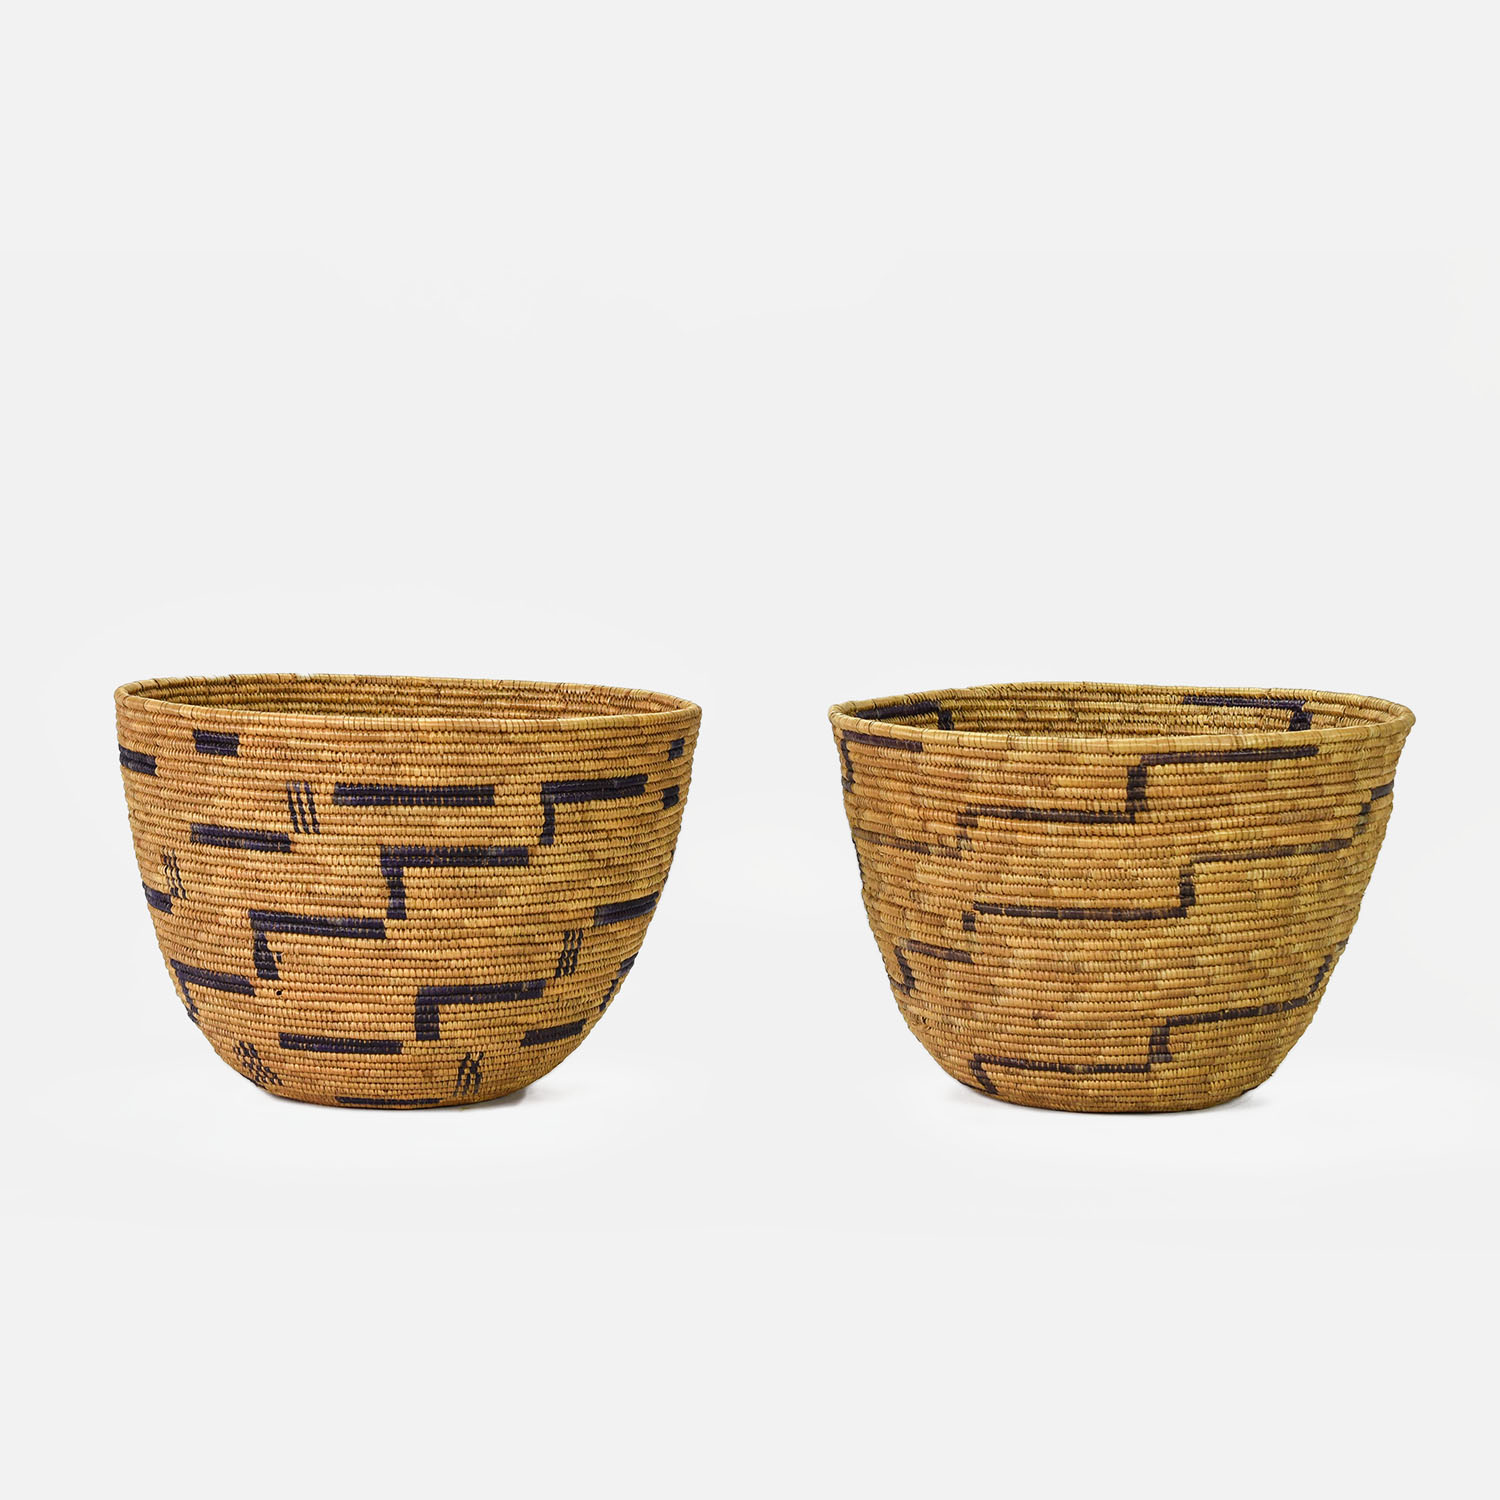 Two Papago Native American Indian Coil Baskets